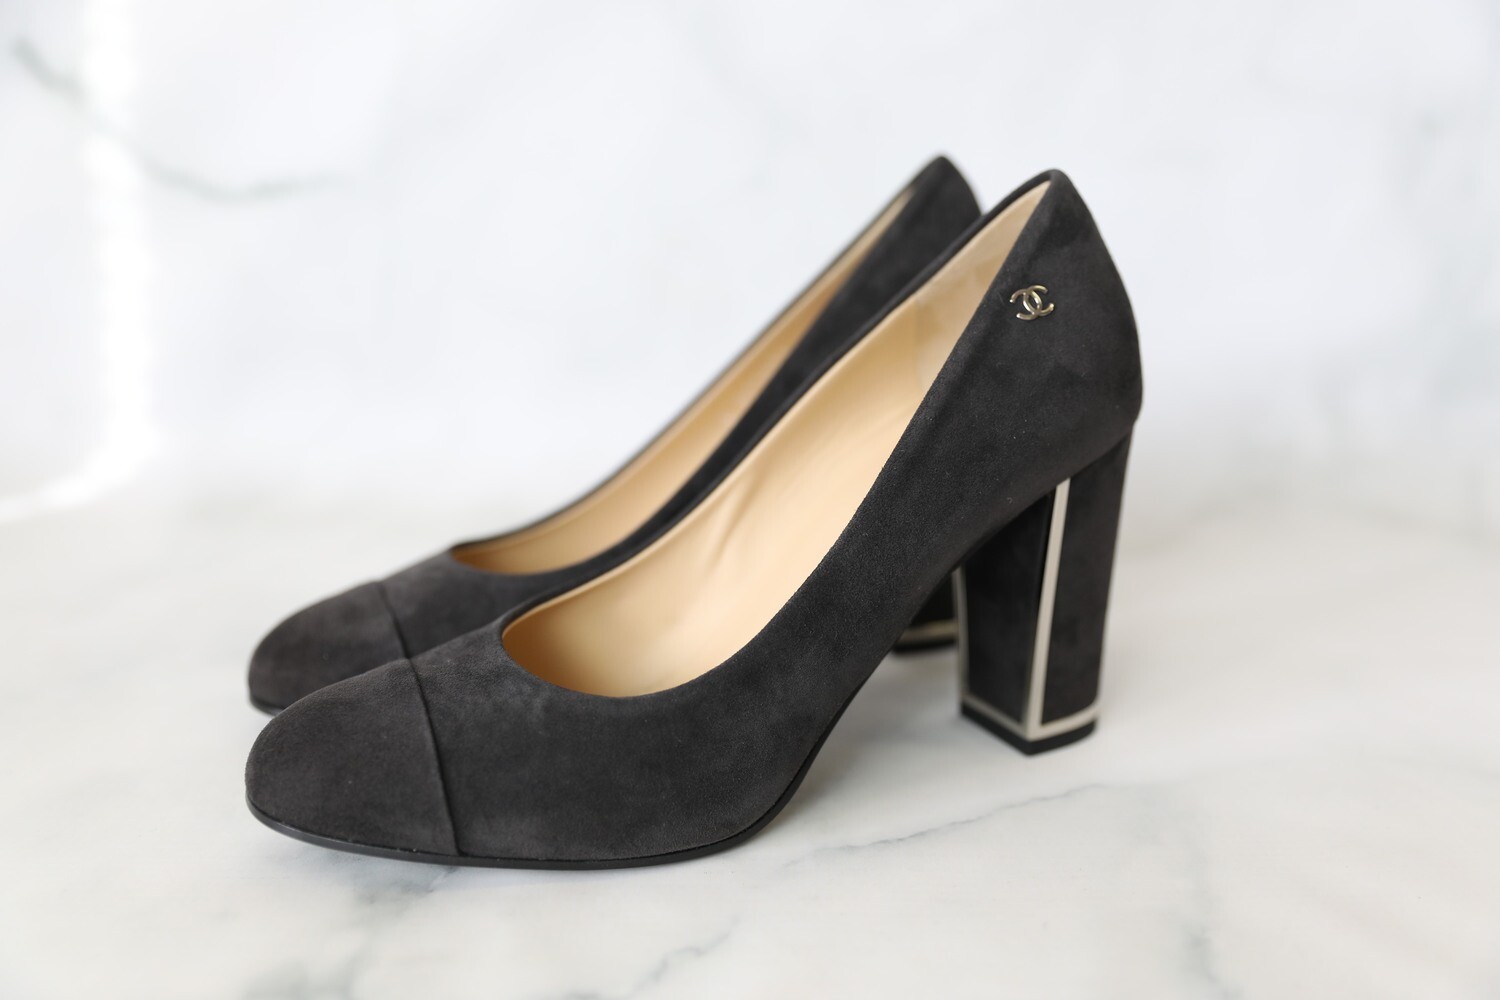 Chanel Shoes Pump Heels, Grey Suede, Size 39.5, New in Box WA001